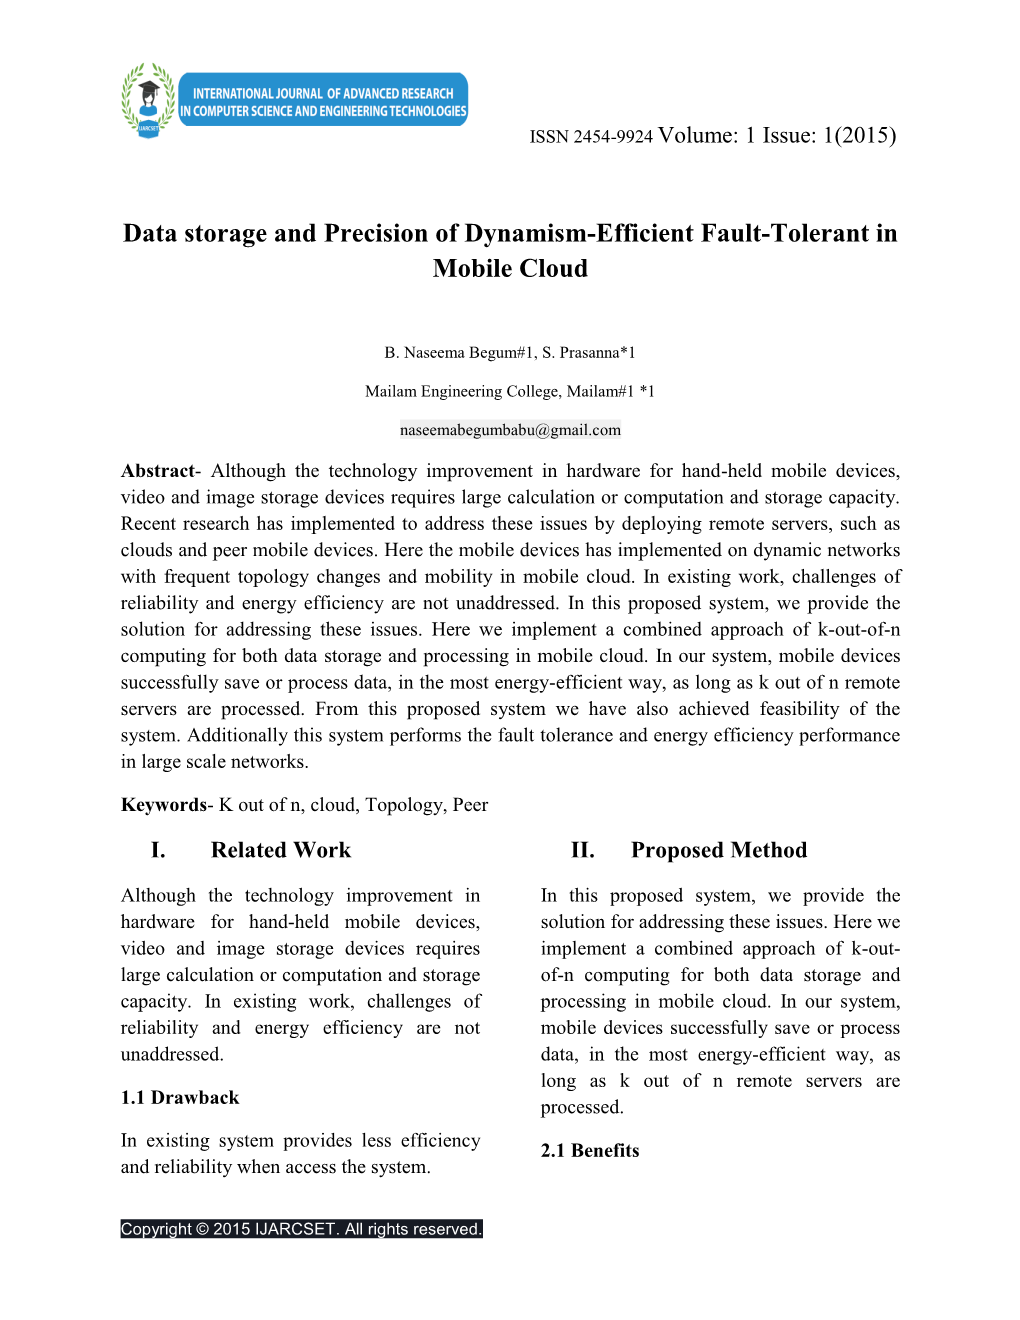 Data Storage and Precision of Dynamism-Efficient Fault-Tolerant in Mobile Cloud